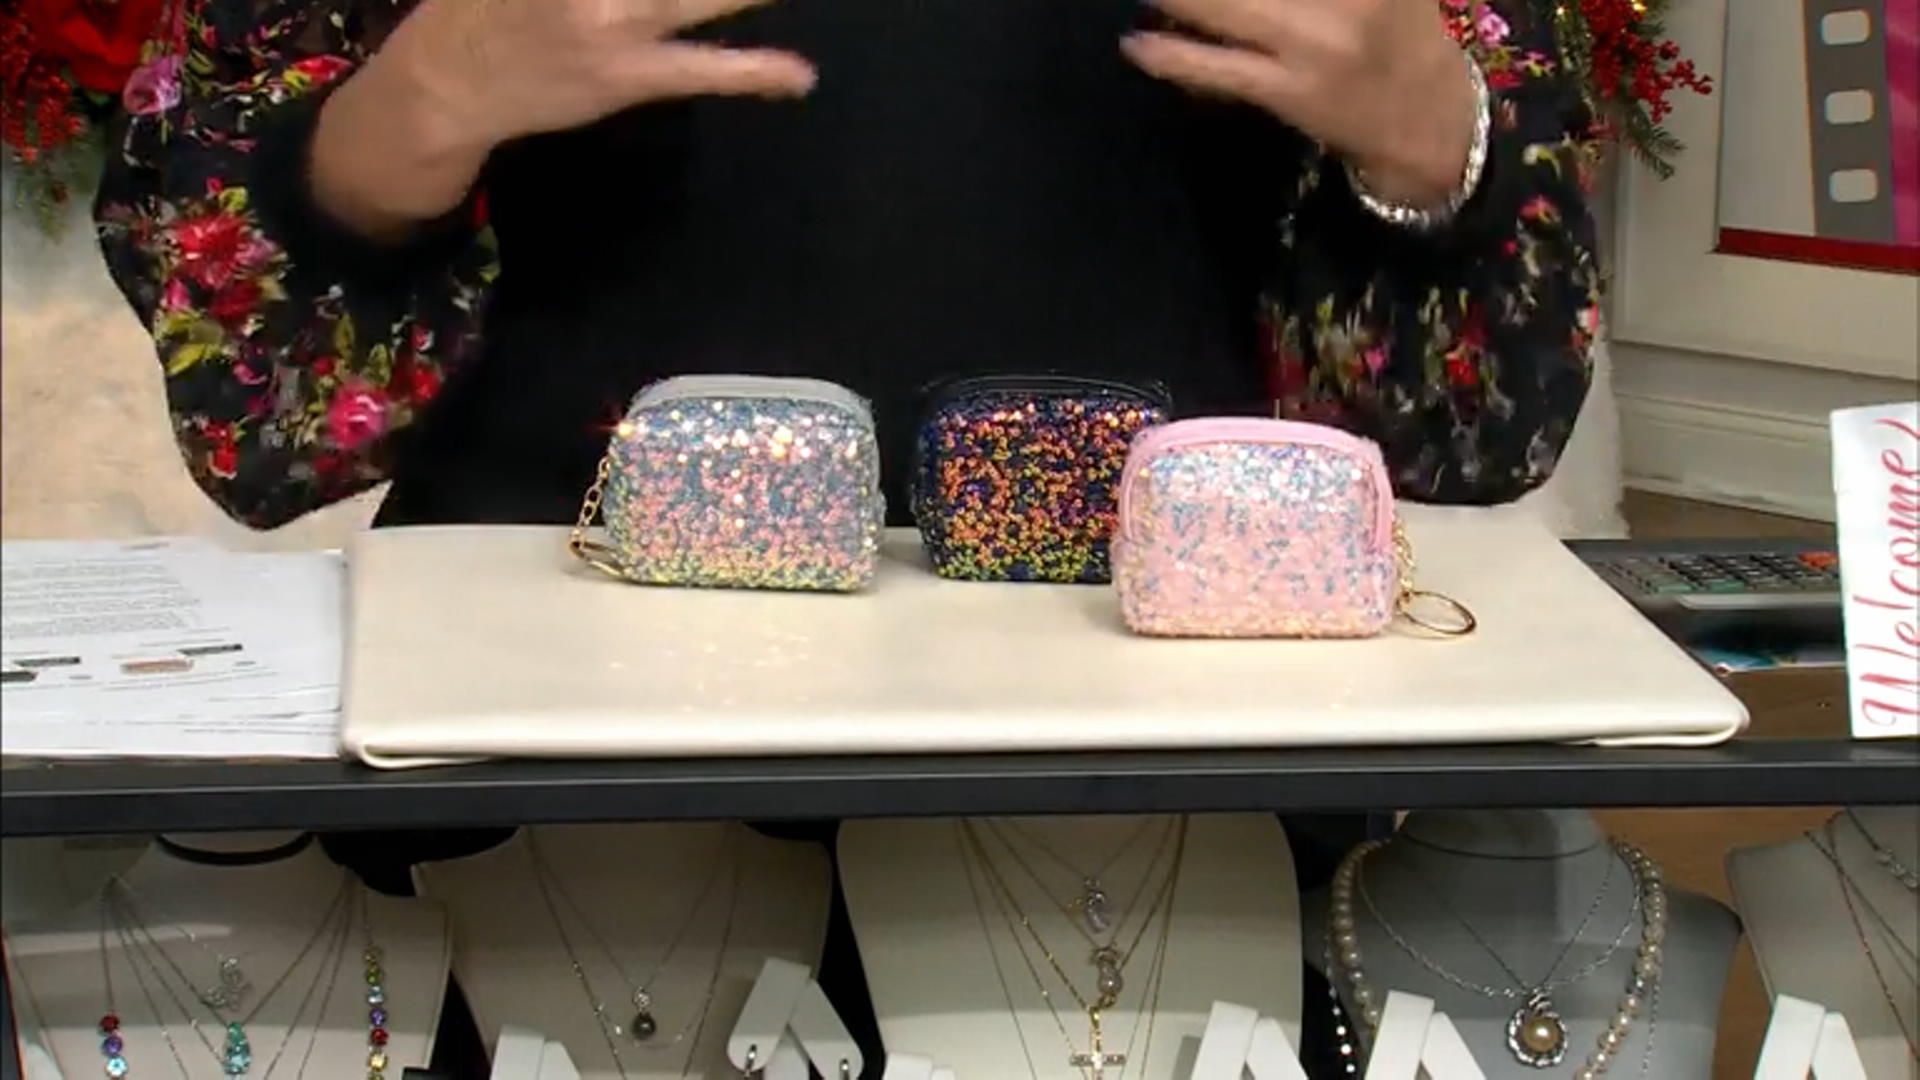 Jewelry Essentials Kit in Pink Sequin Zippered Pouch Video Thumbnail